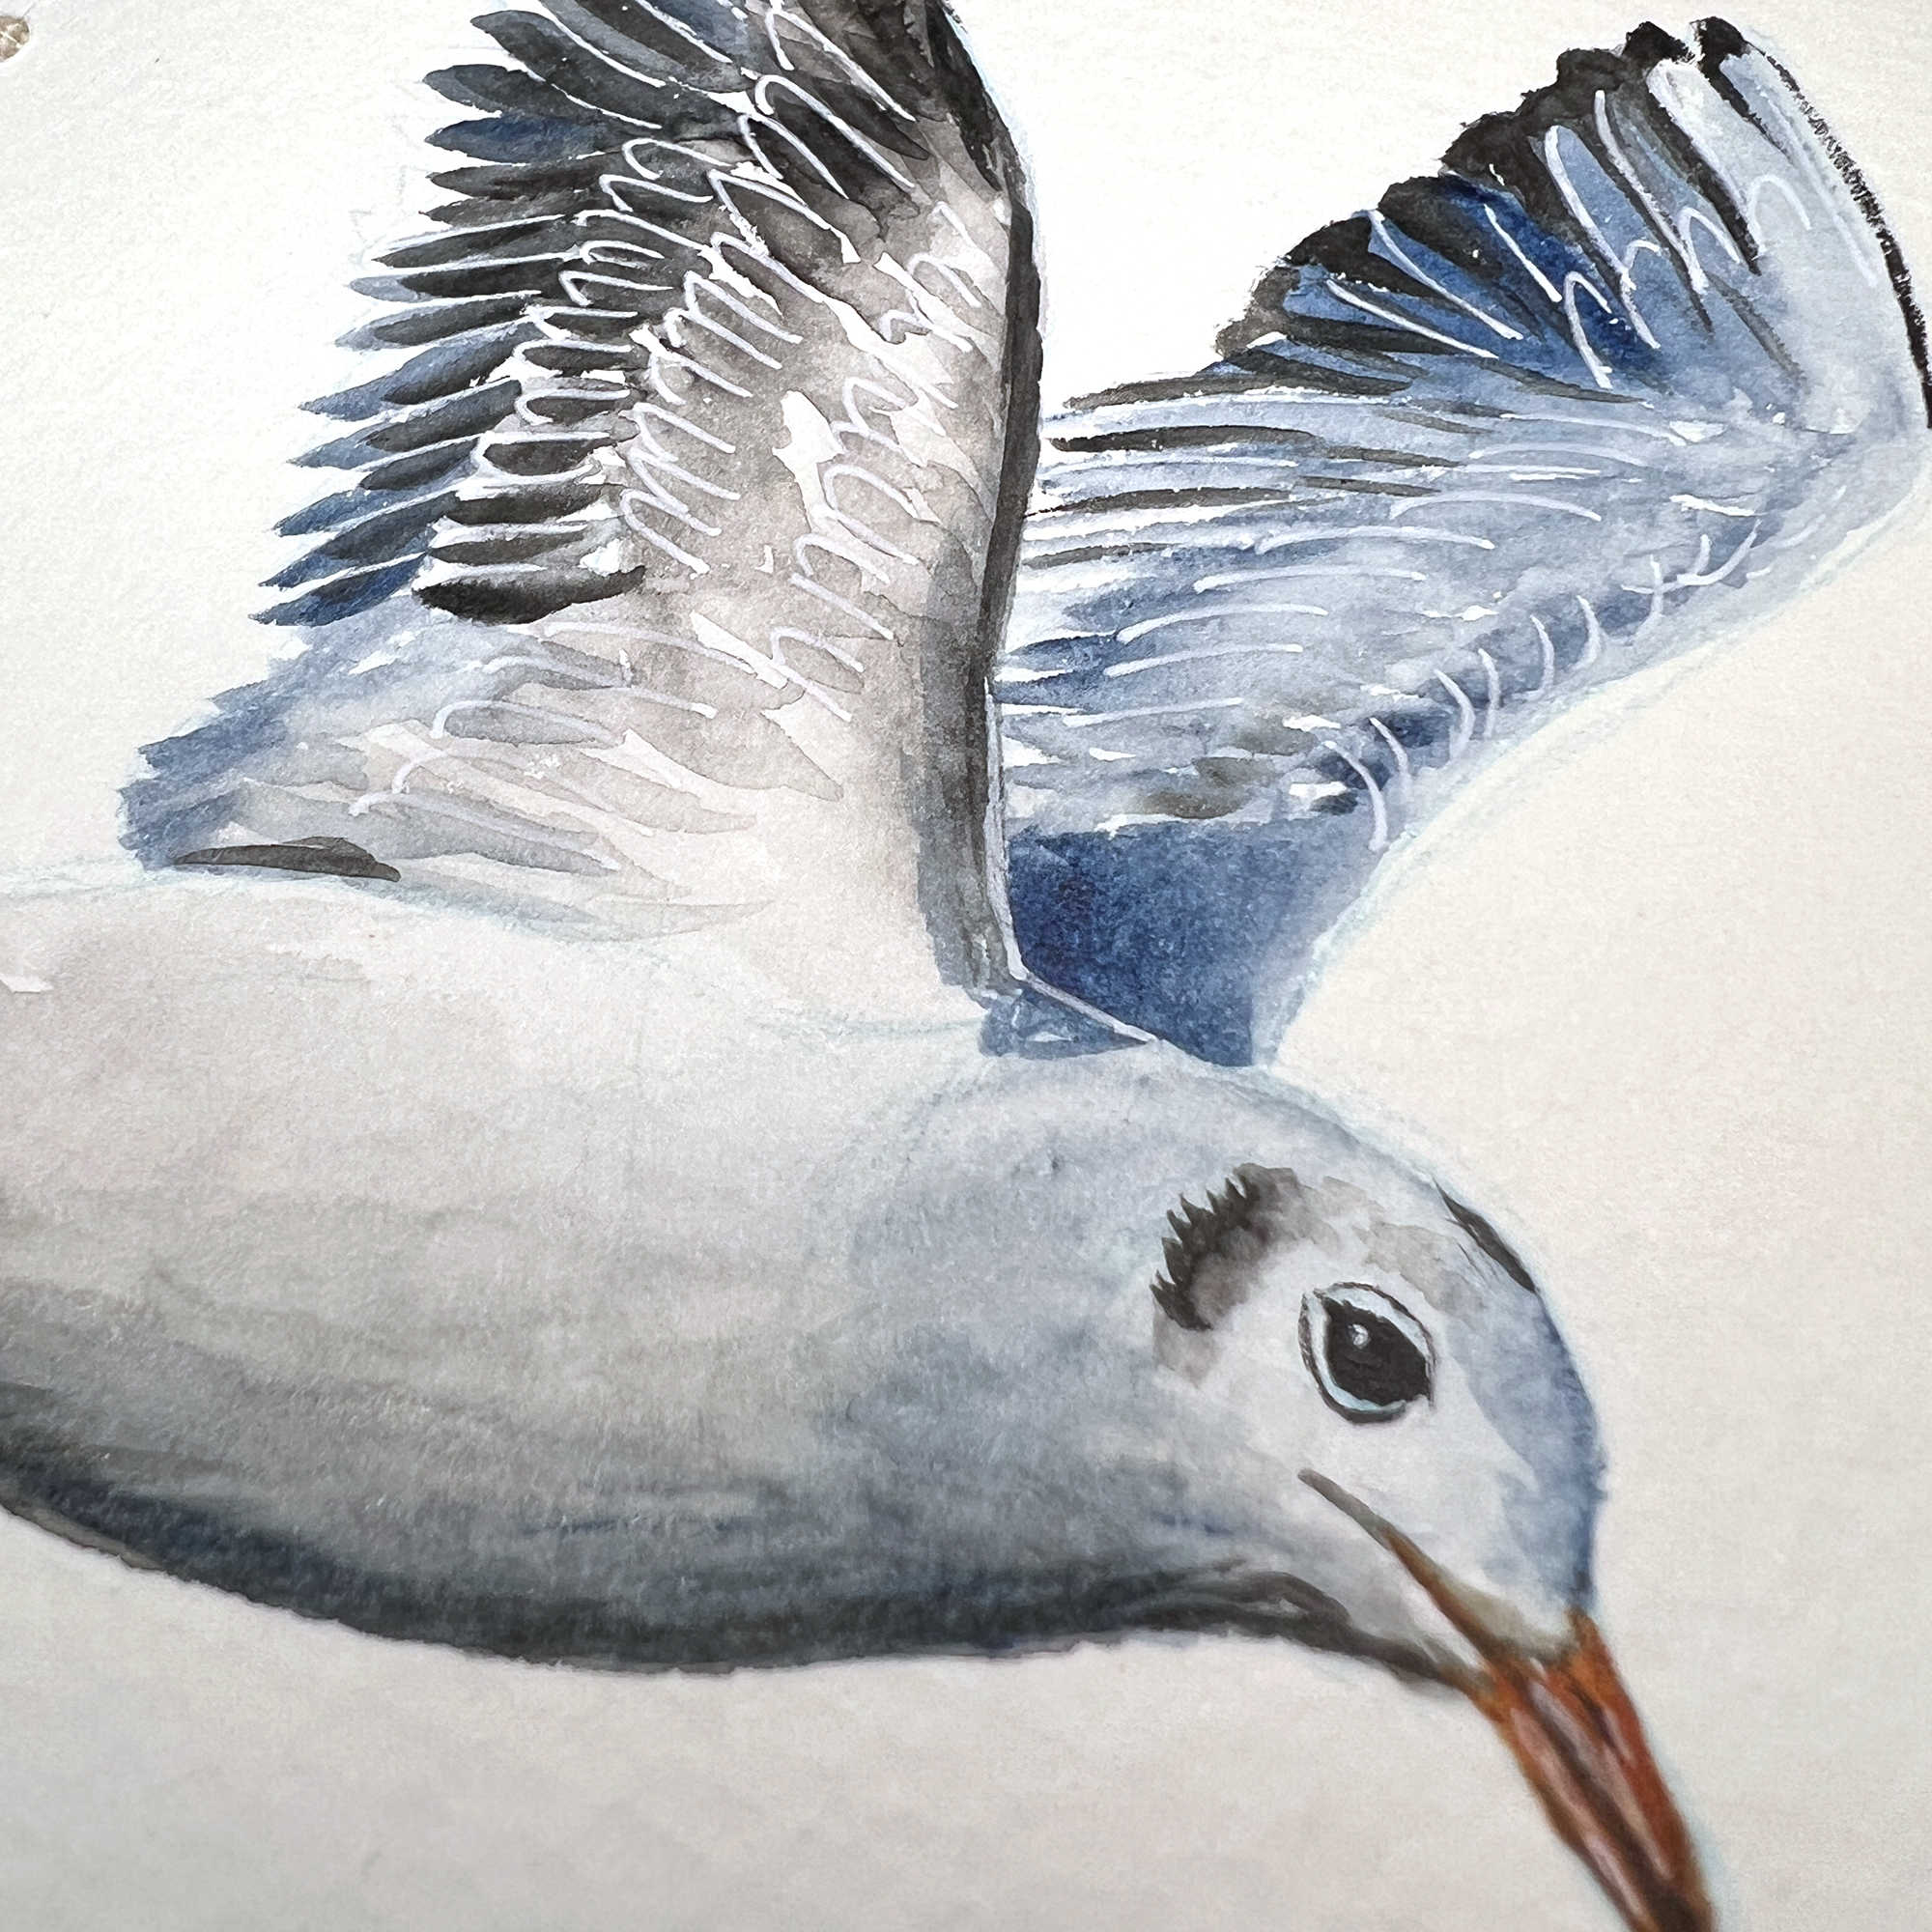 Close up detail view of a seagull watercolor sketch, showing the detail of the face and wings